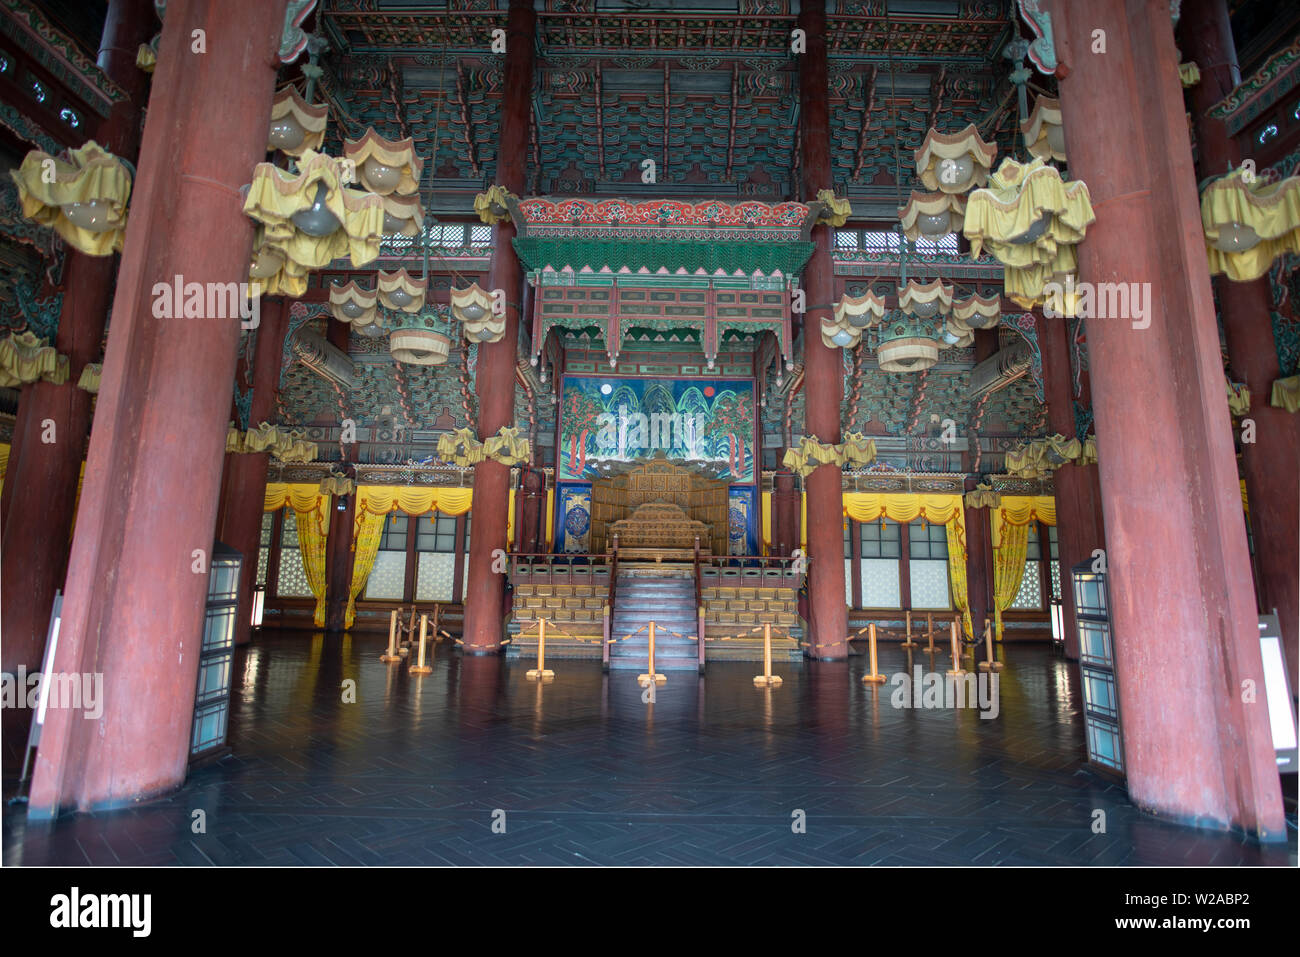 Interior of one of the pavilions of the Changdeokgung Palace, Seoul, South Korea Stock Photo